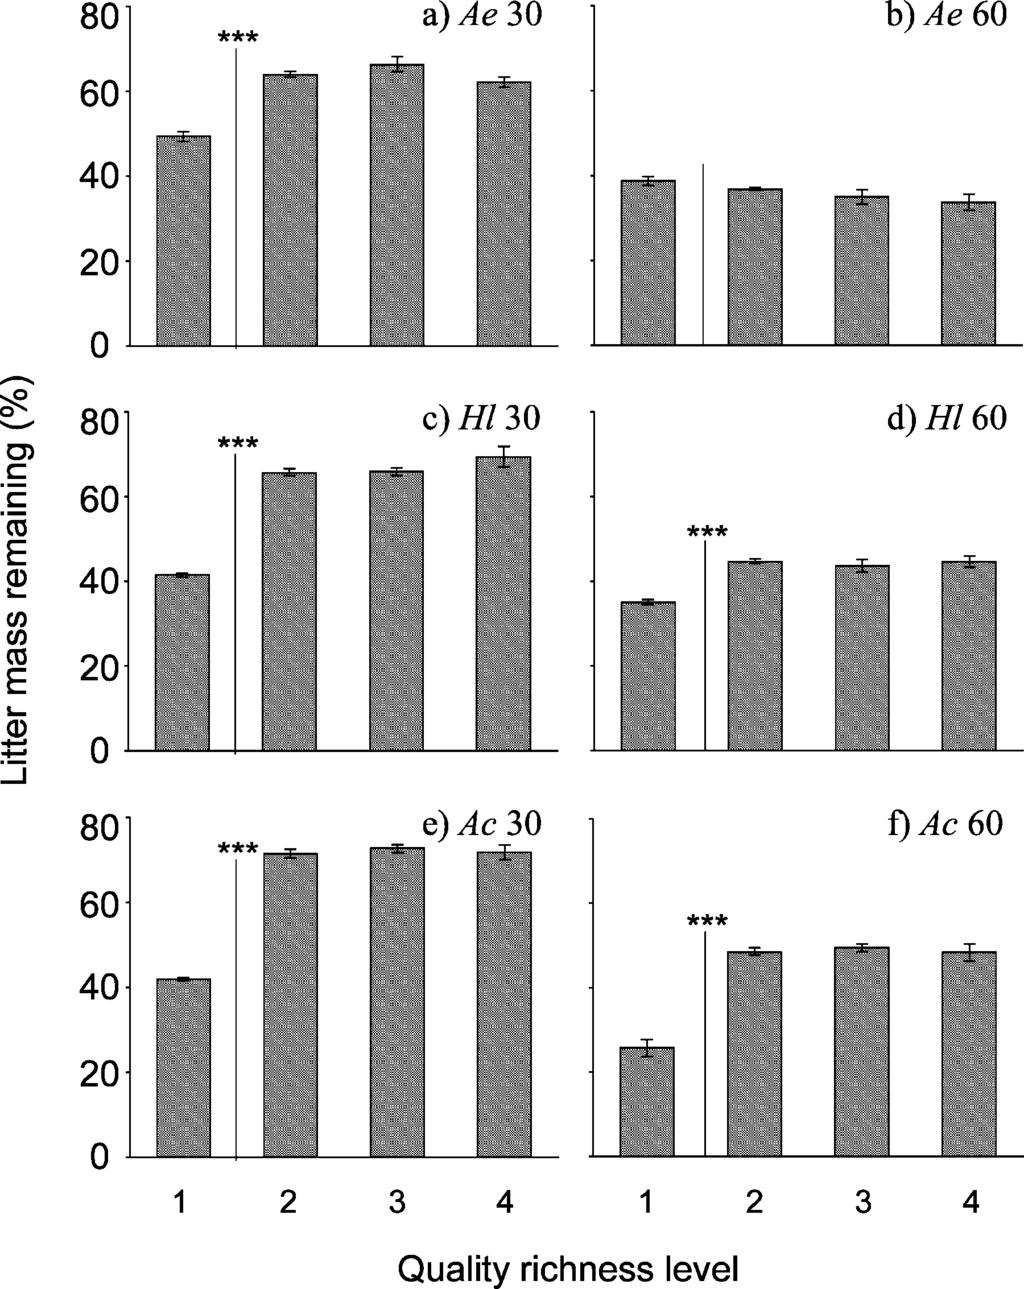 Fig. 1. Effect of litter quality richness on mass loss of a,b) Arrhenatherum elatius, c,d) Holcus lanatus, e,f) Agrostis capillaris litter after 30 (a,c,e) and 60 (b,d,f) days of field exposure.